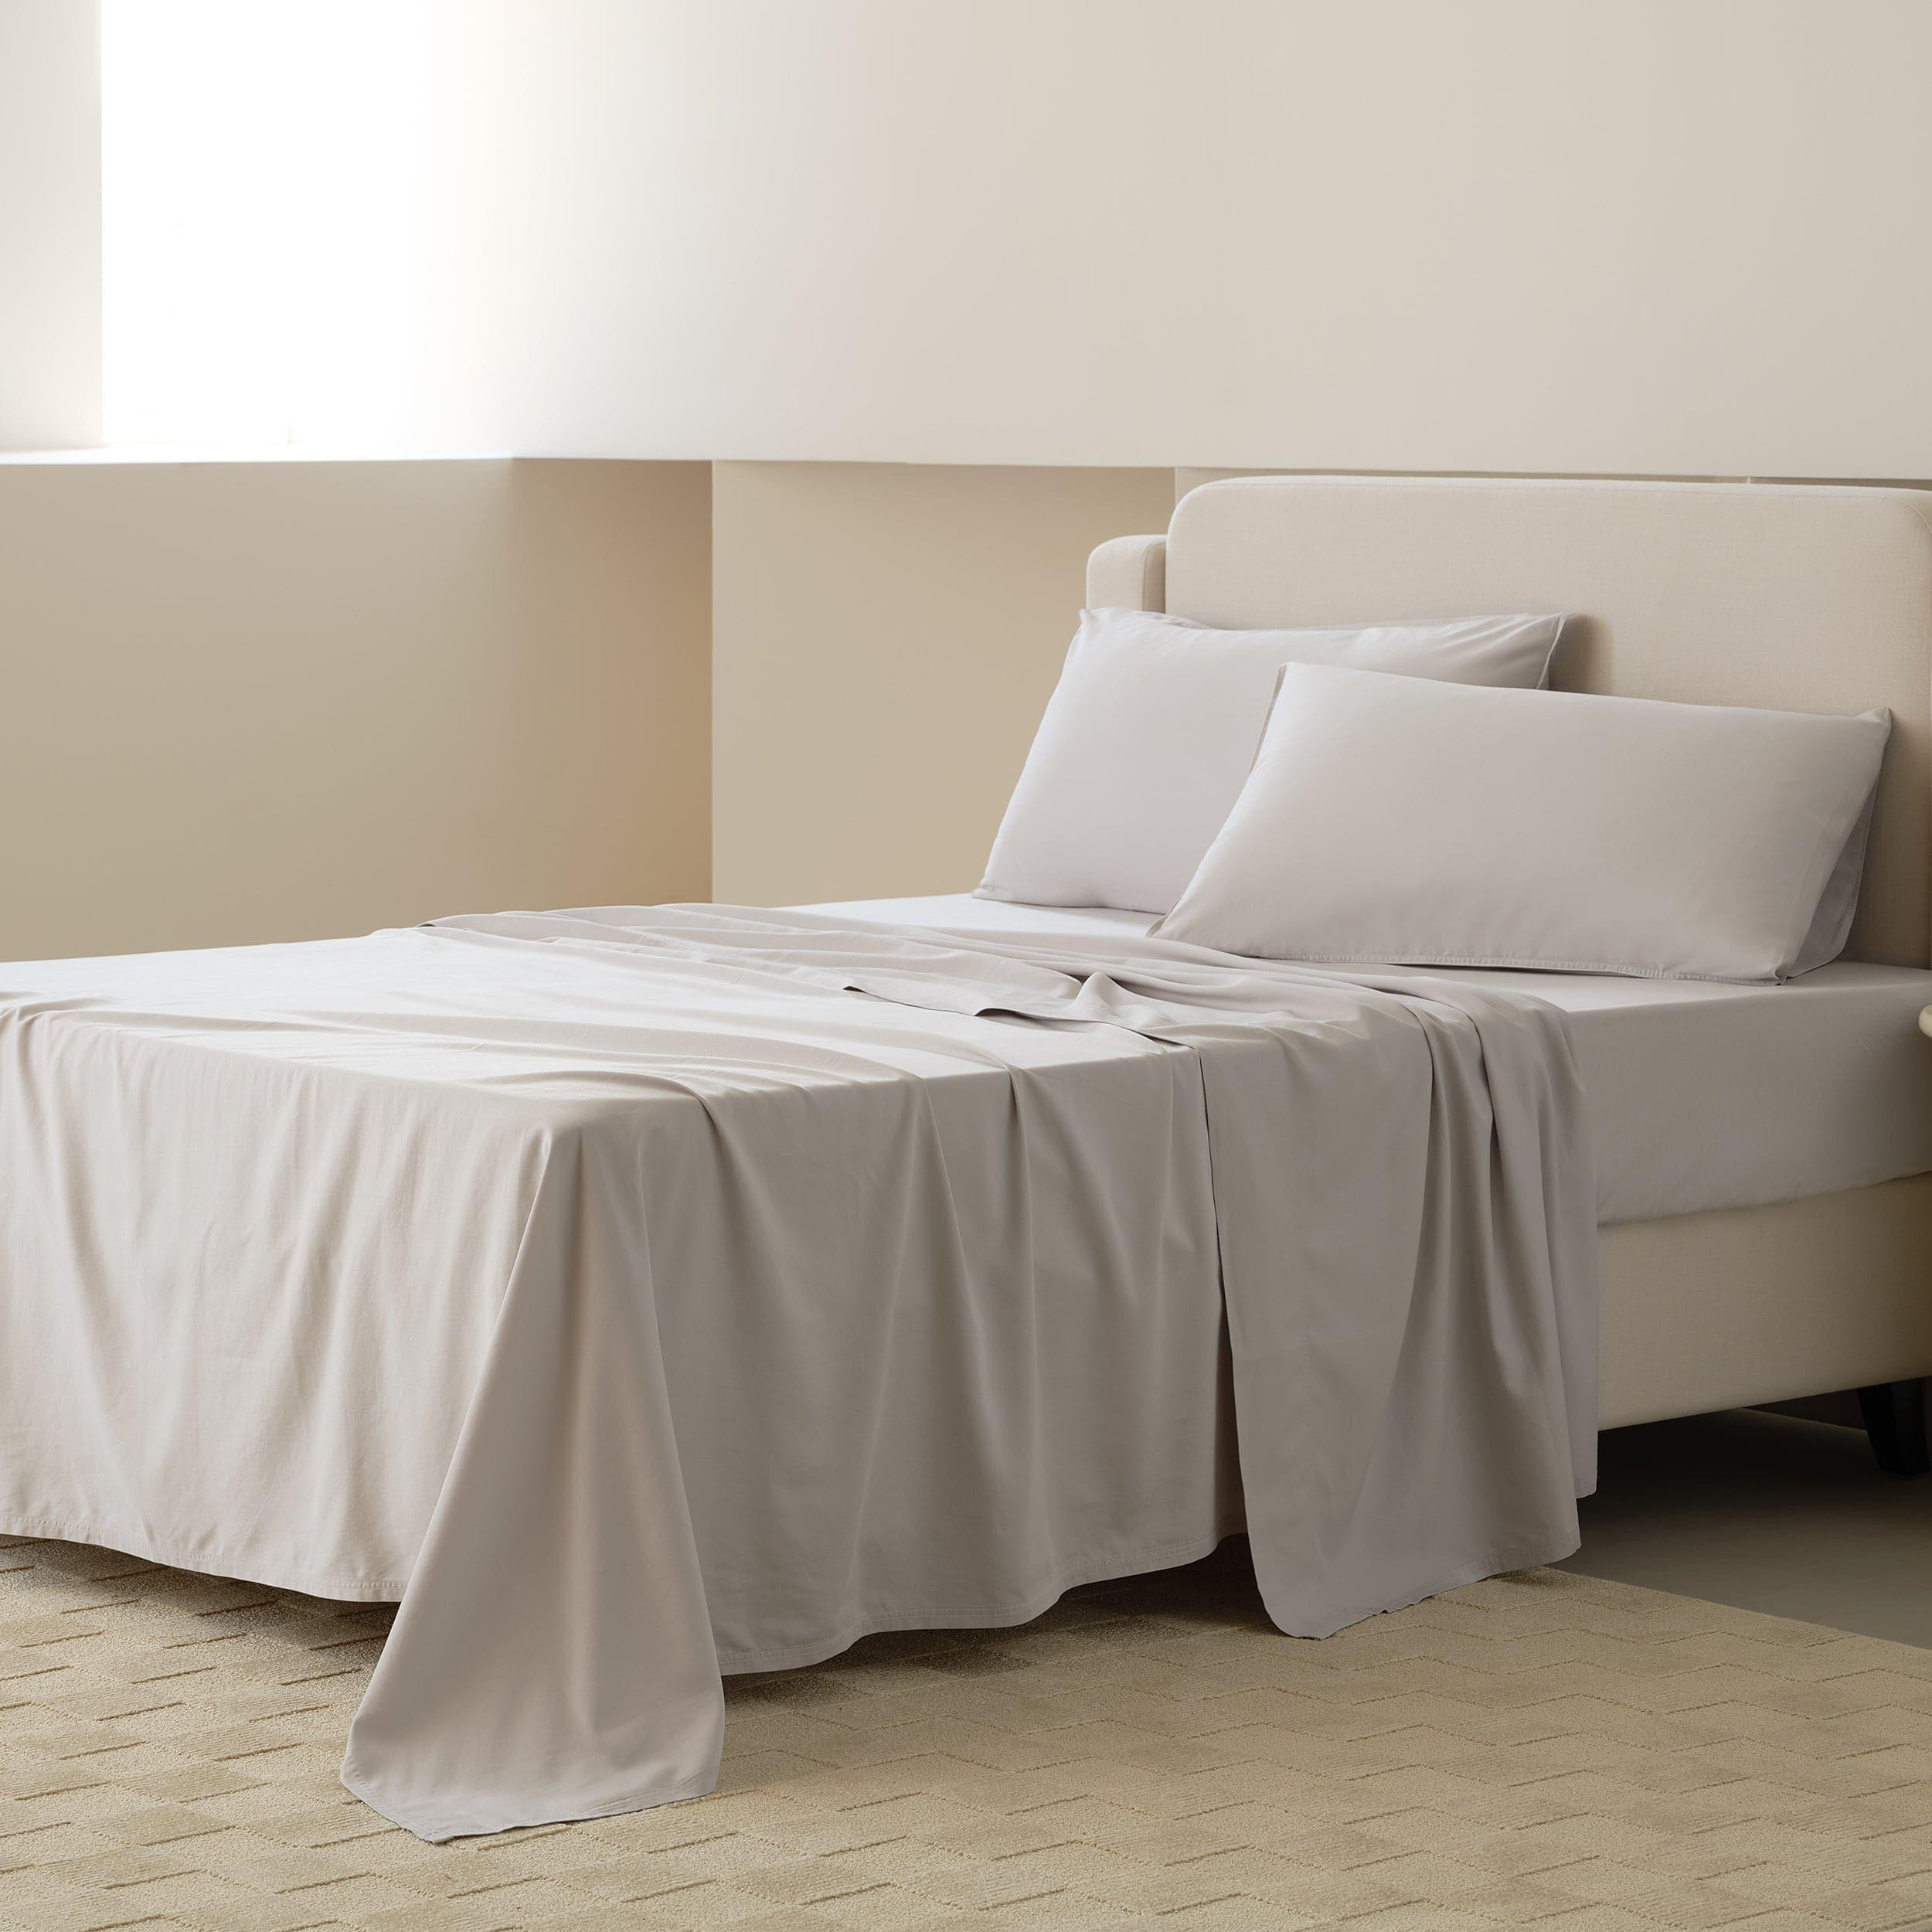 Keep your king size mattress protected and cozy with a fitted sheet set.